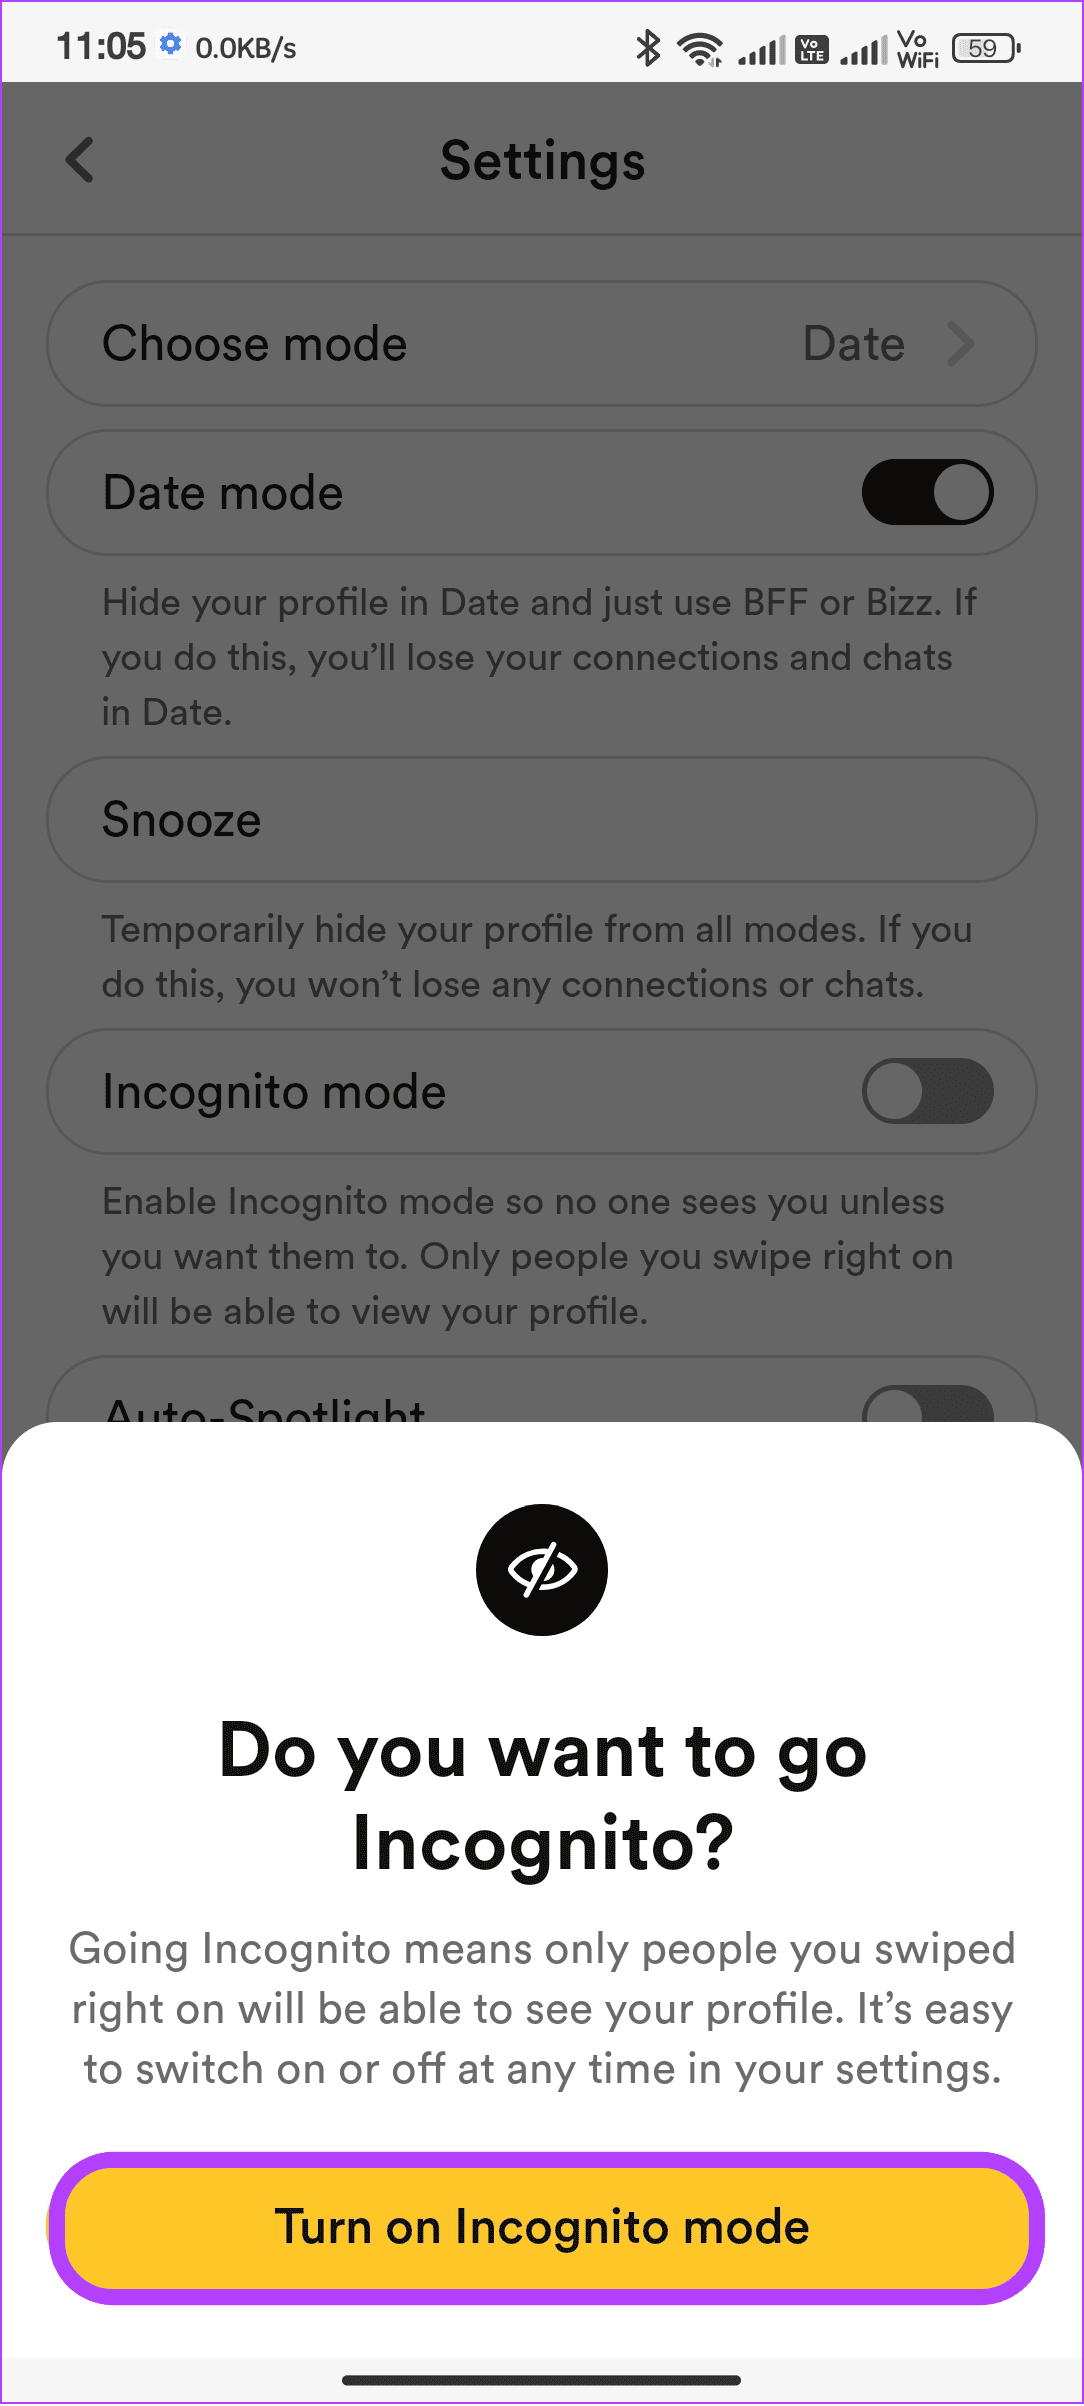 Choose turn on incognito mode